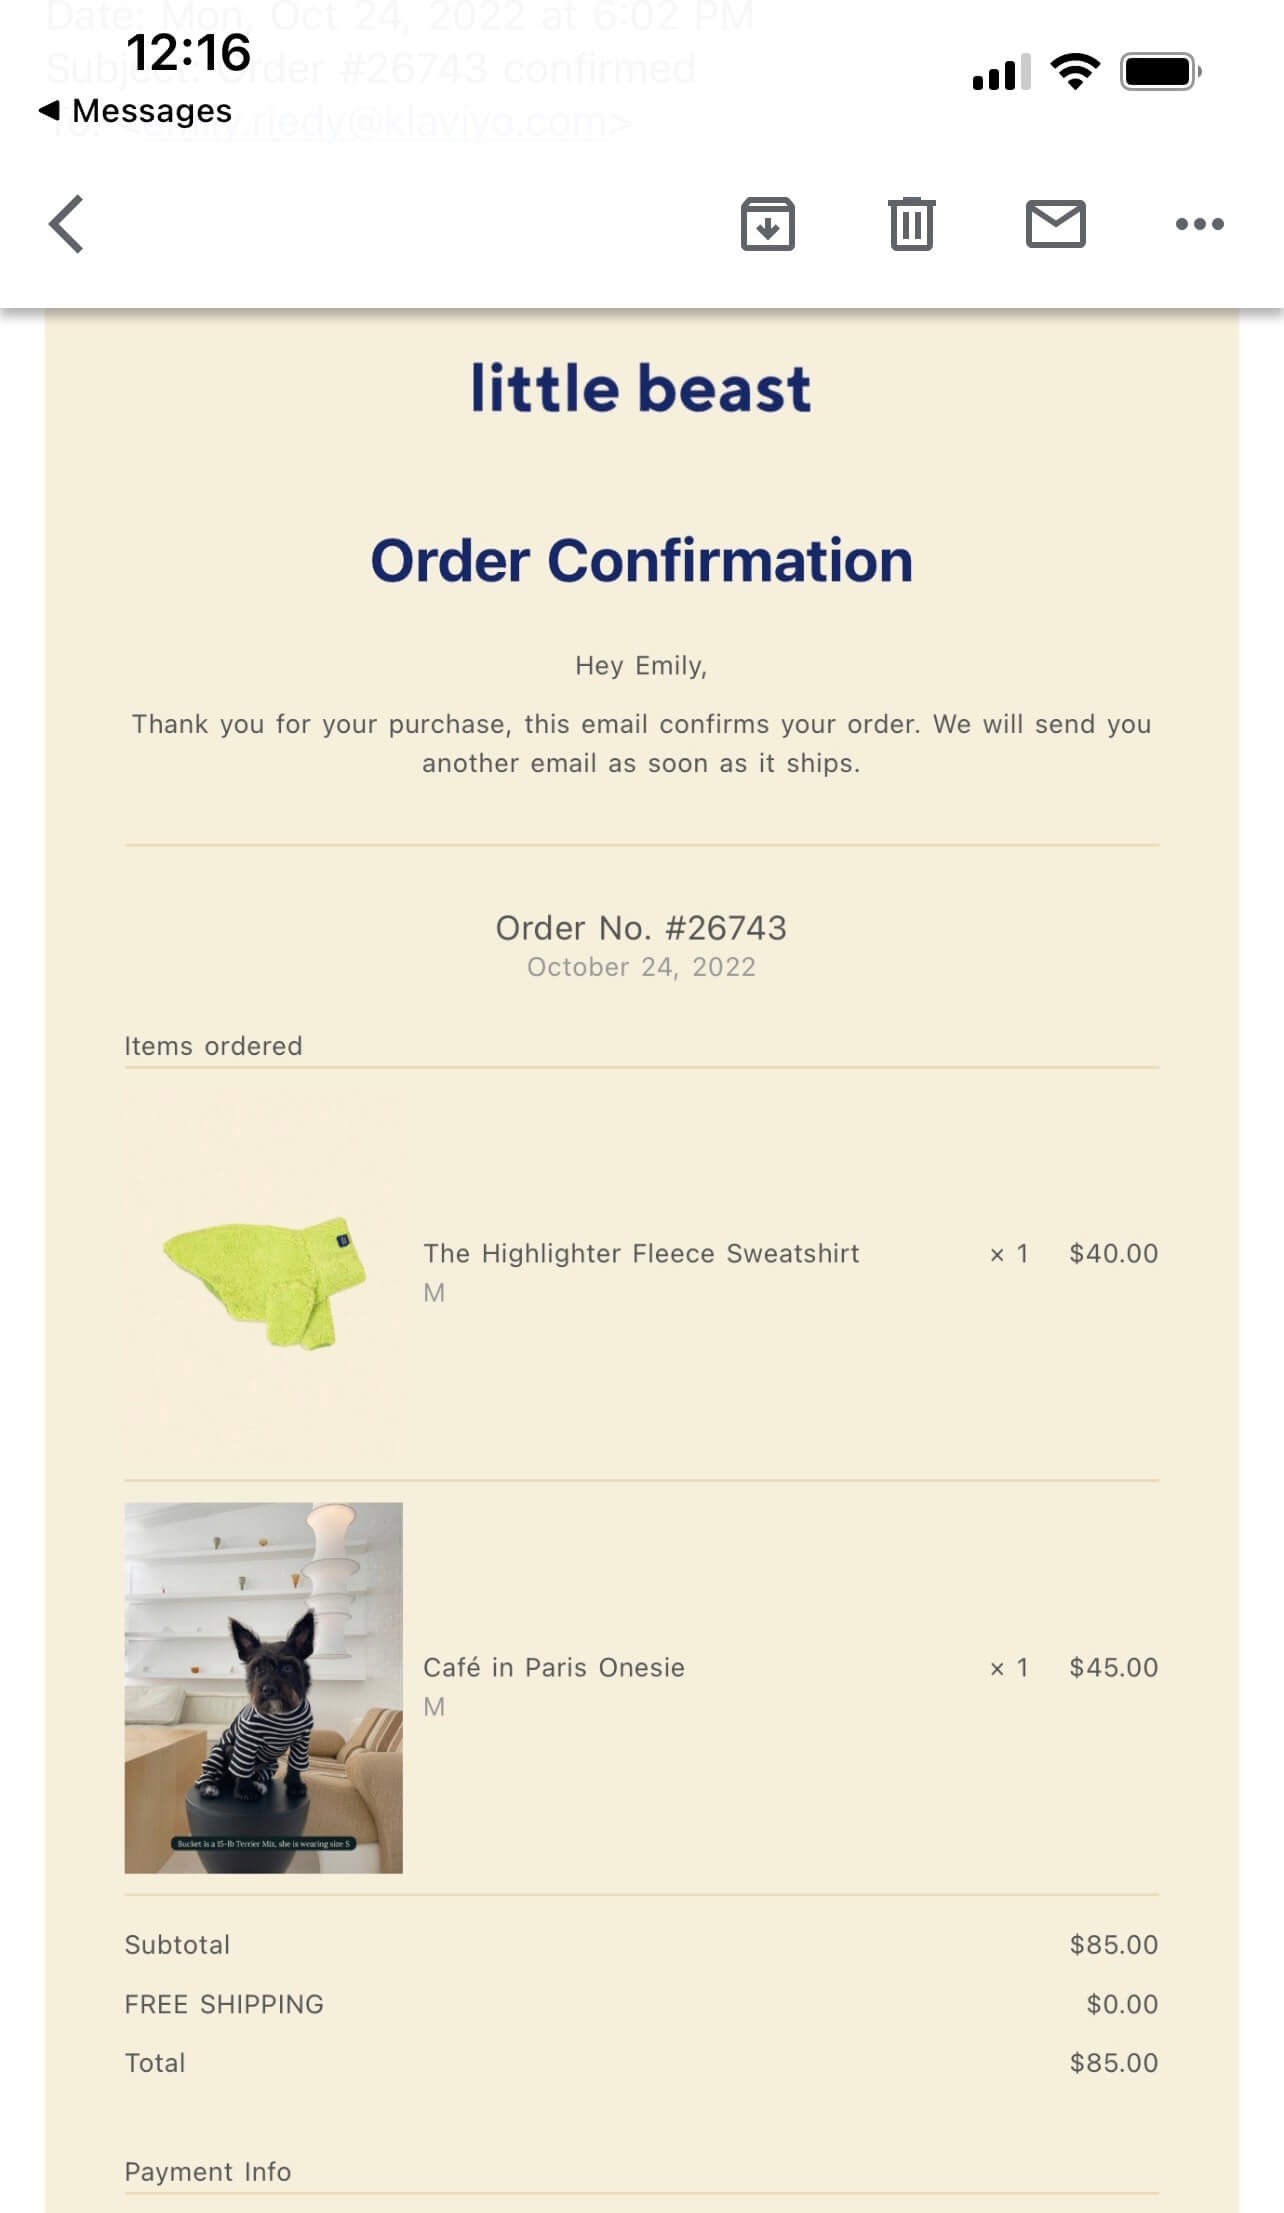 Image shows an order confirmation email from Little Beast, optimized for mobile.